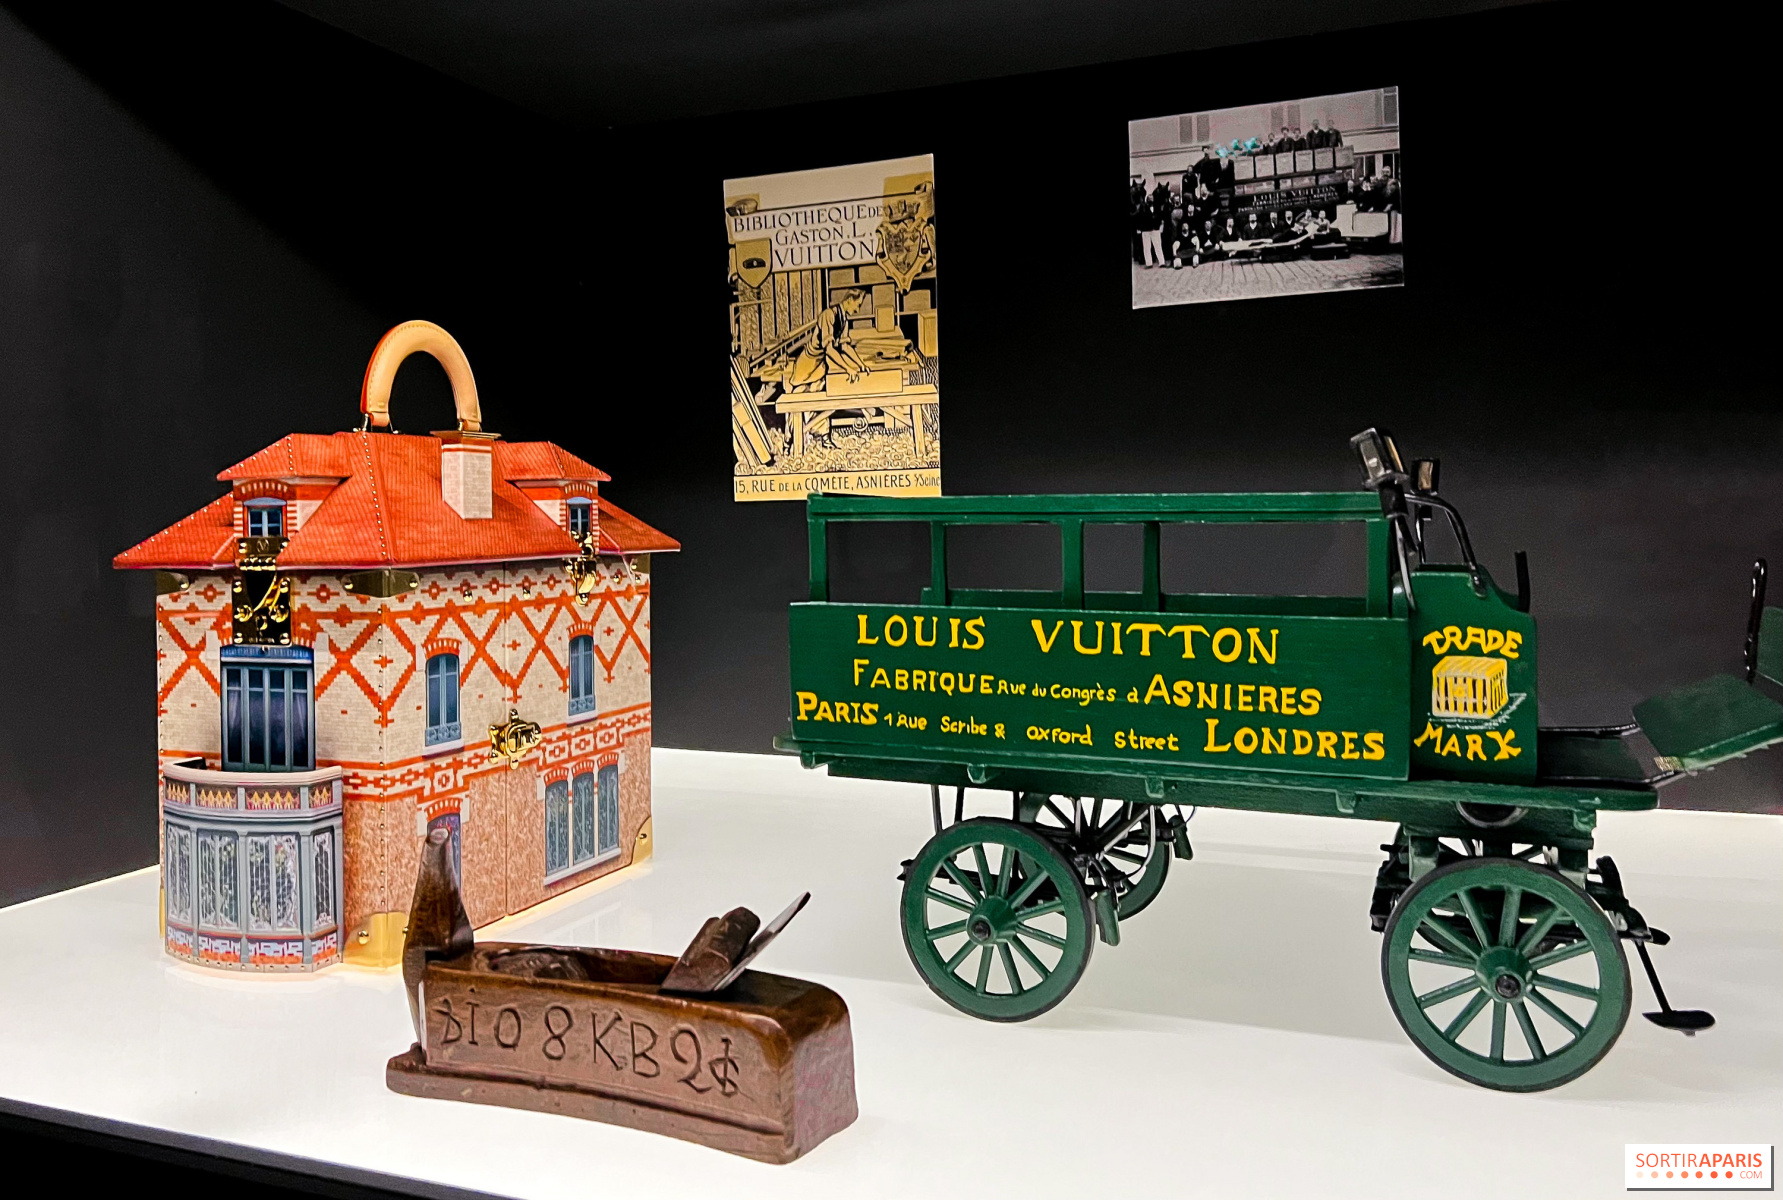 La Malle Courrier: the new free exhibition from Maison Louis